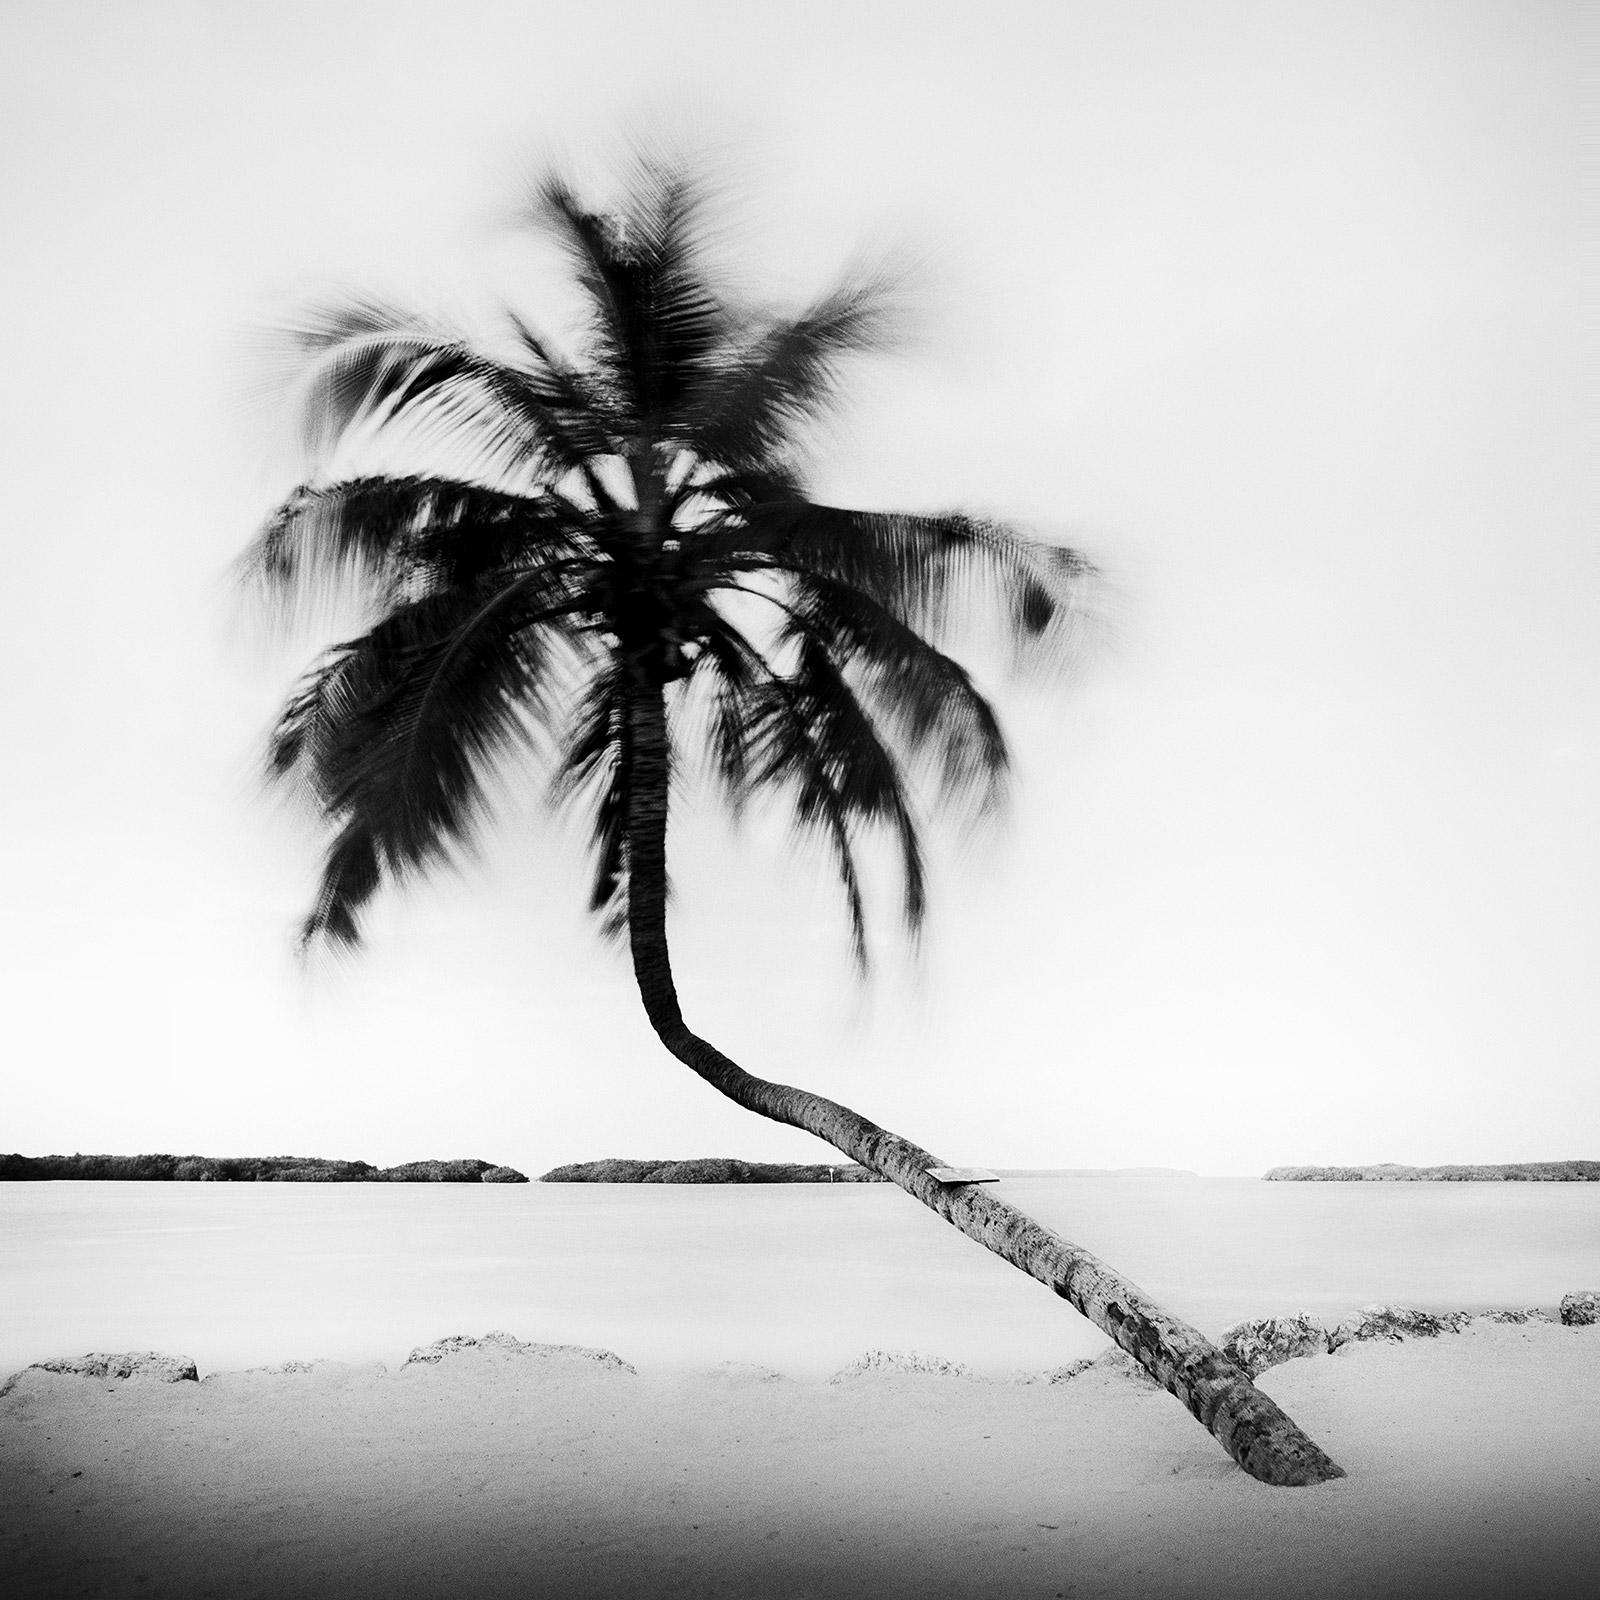 Gerald Berghammer, Ina Forstinger Black and White Photograph - Bent Palm, Beach, Florida, USA, black and white fine art photography, landscape